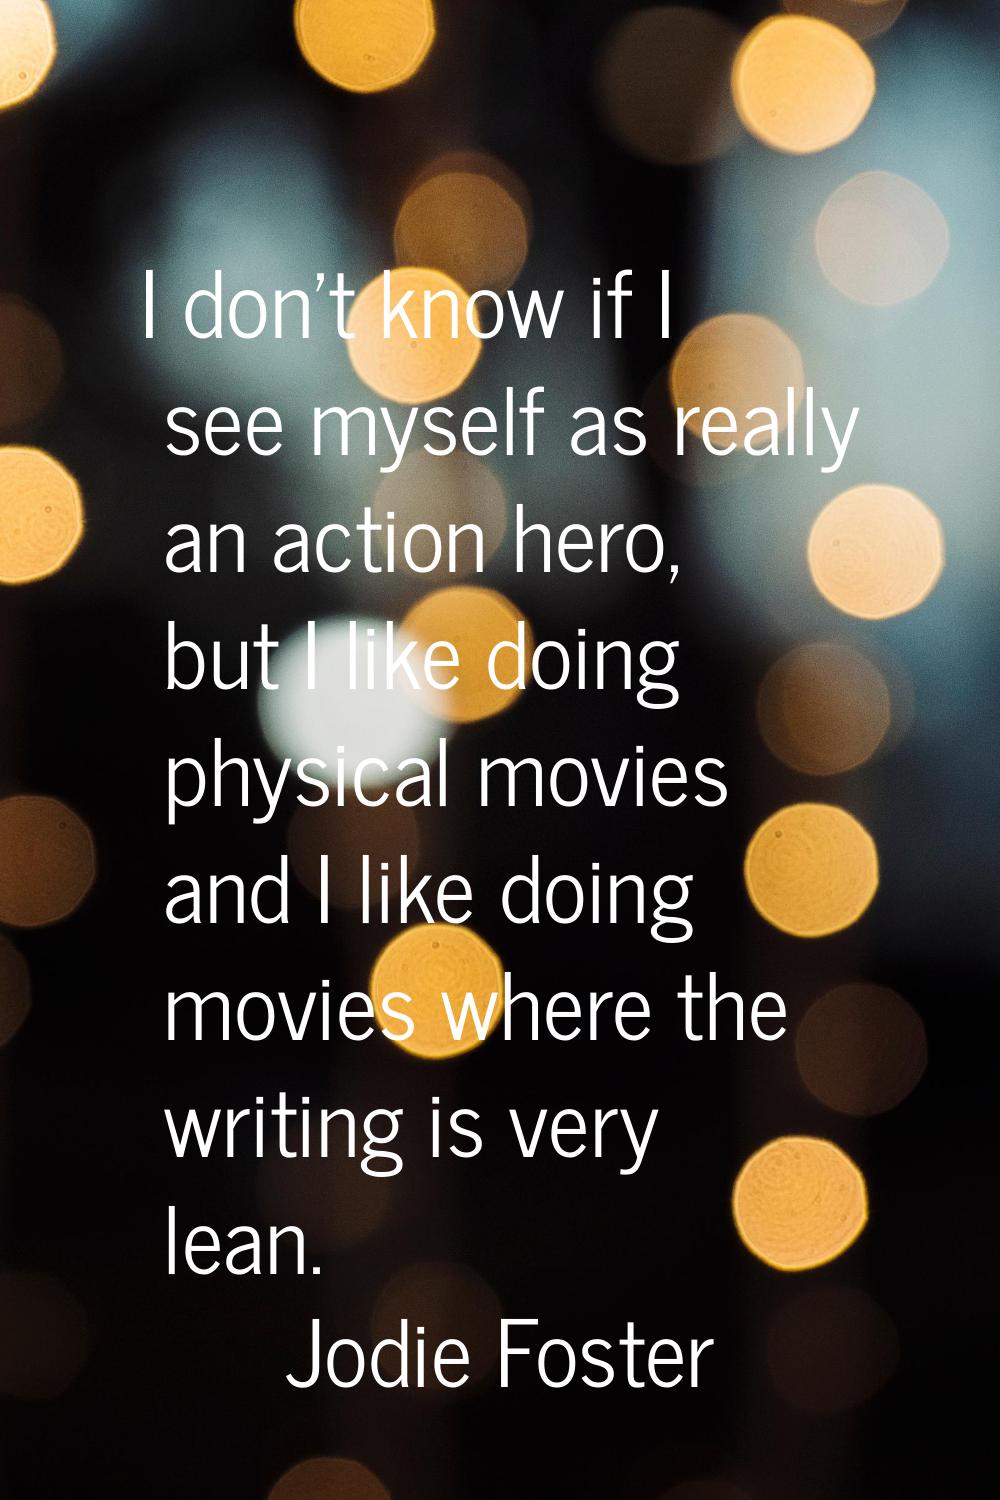 I don't know if I see myself as really an action hero, but I like doing physical movies and I like 